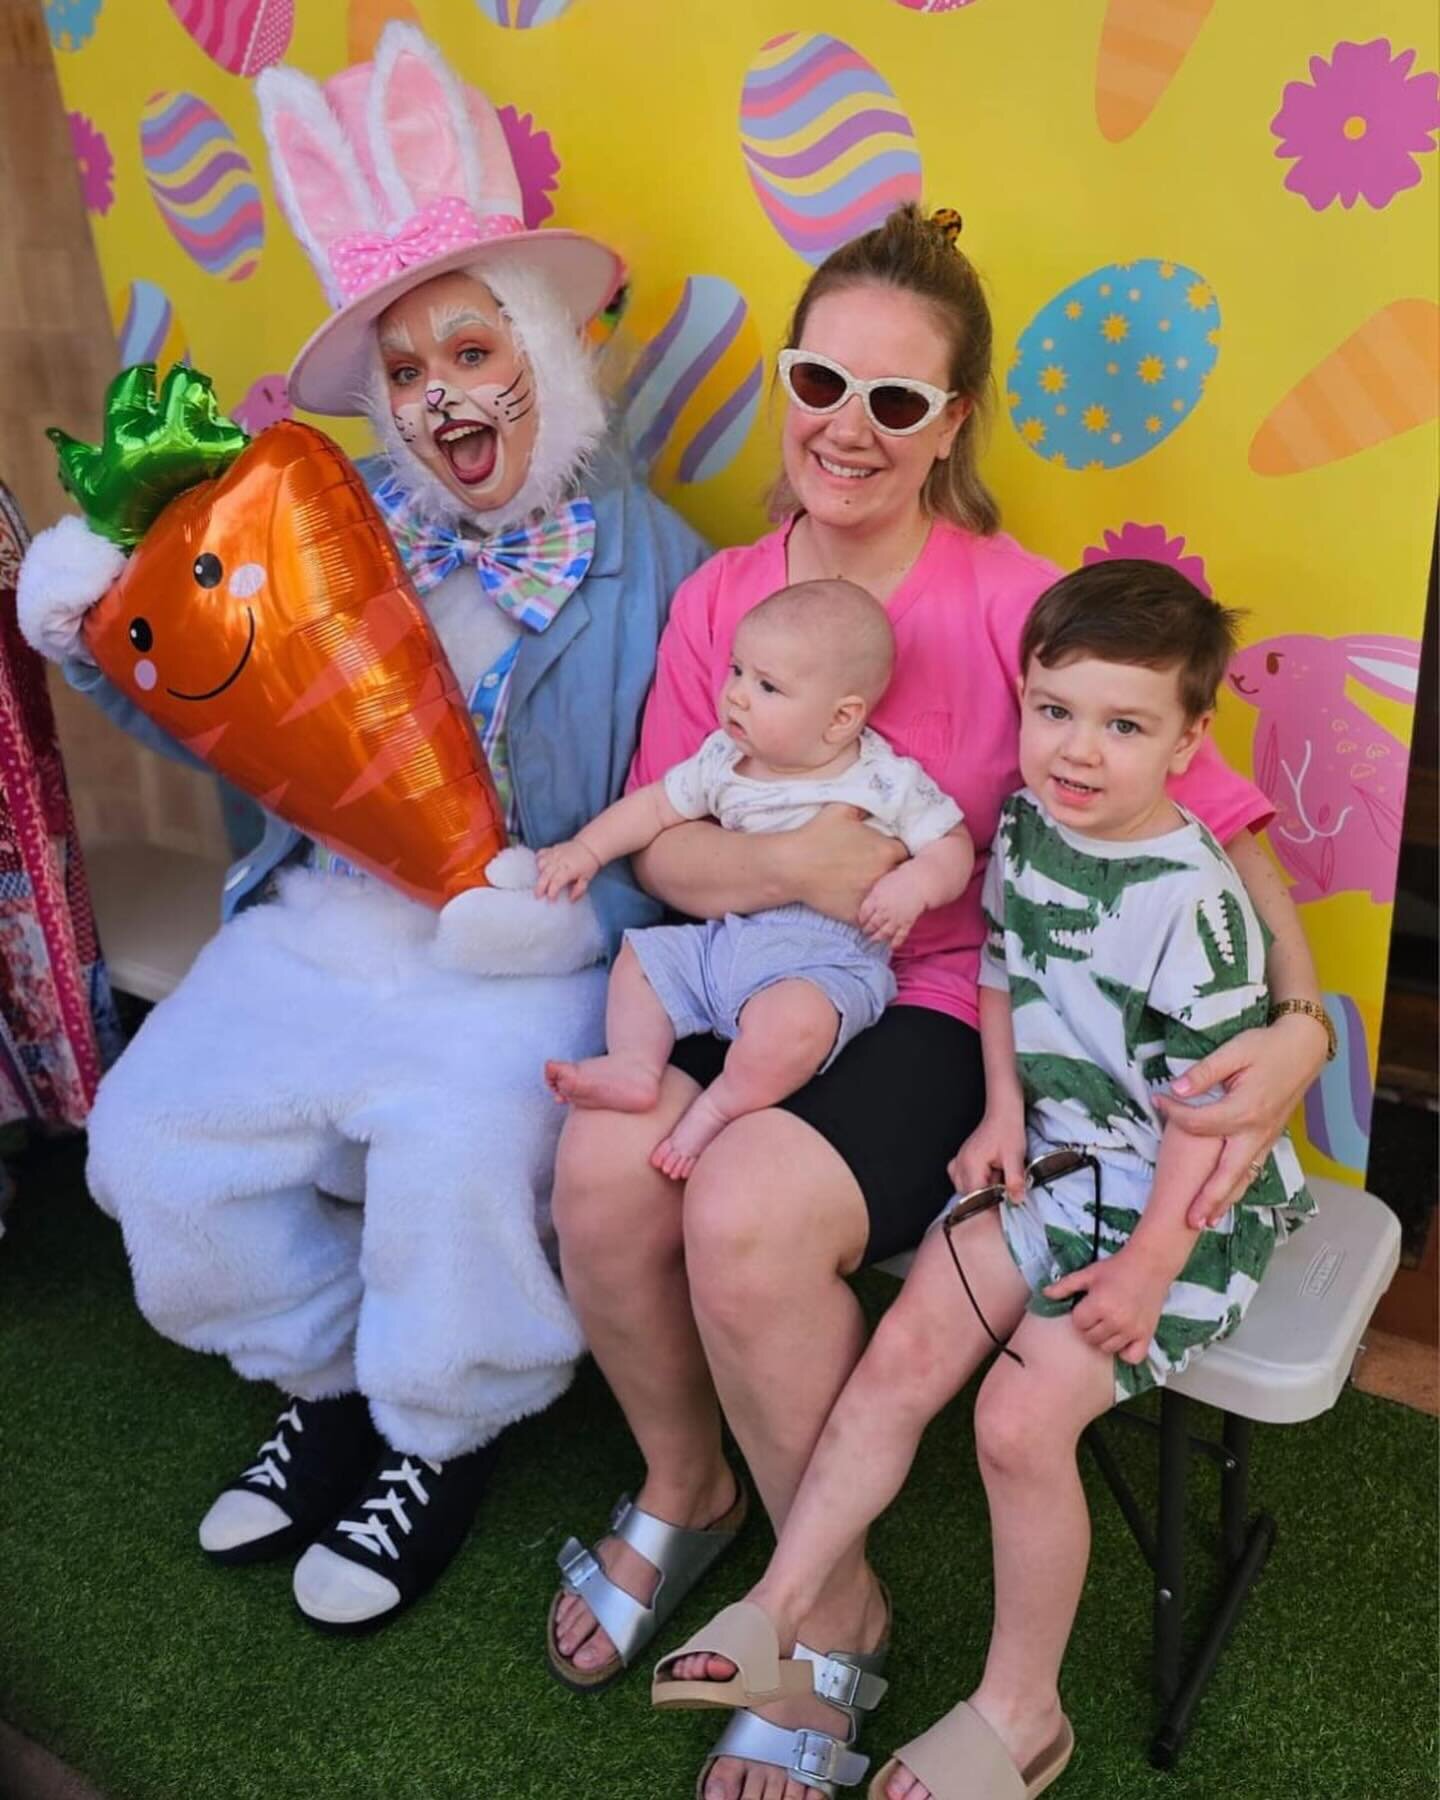 THANKS 🤩 for coming down to celebrate 🥳 Easter 🐣 with us at Mundaring Village!

So many smiling faces met with our Easter Bunny 🐰, enjoyed our Glitter &amp; Tattoo Bar, and delighted in Easter craft!

Have a safe and happy Easter everyone!